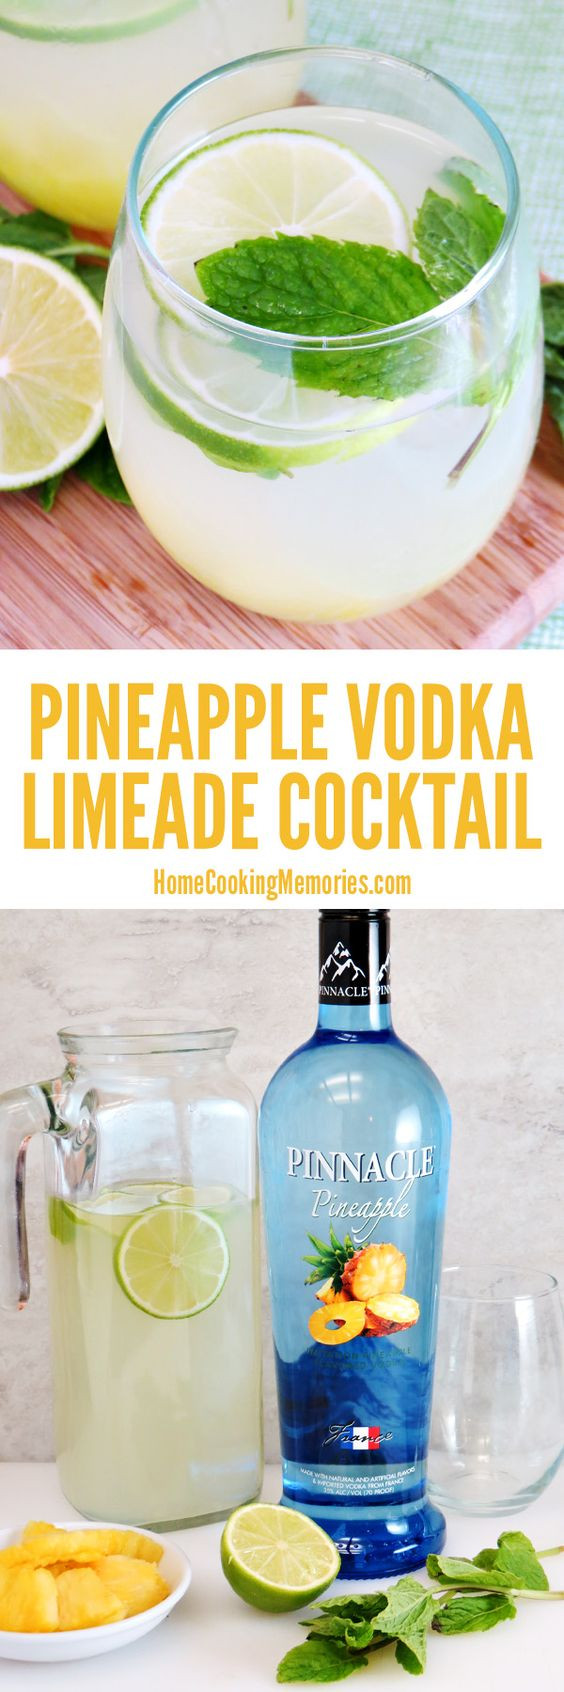 Simple Drinks With Vodka
 Pineapple vodka Easy cocktails and Vodka on Pinterest